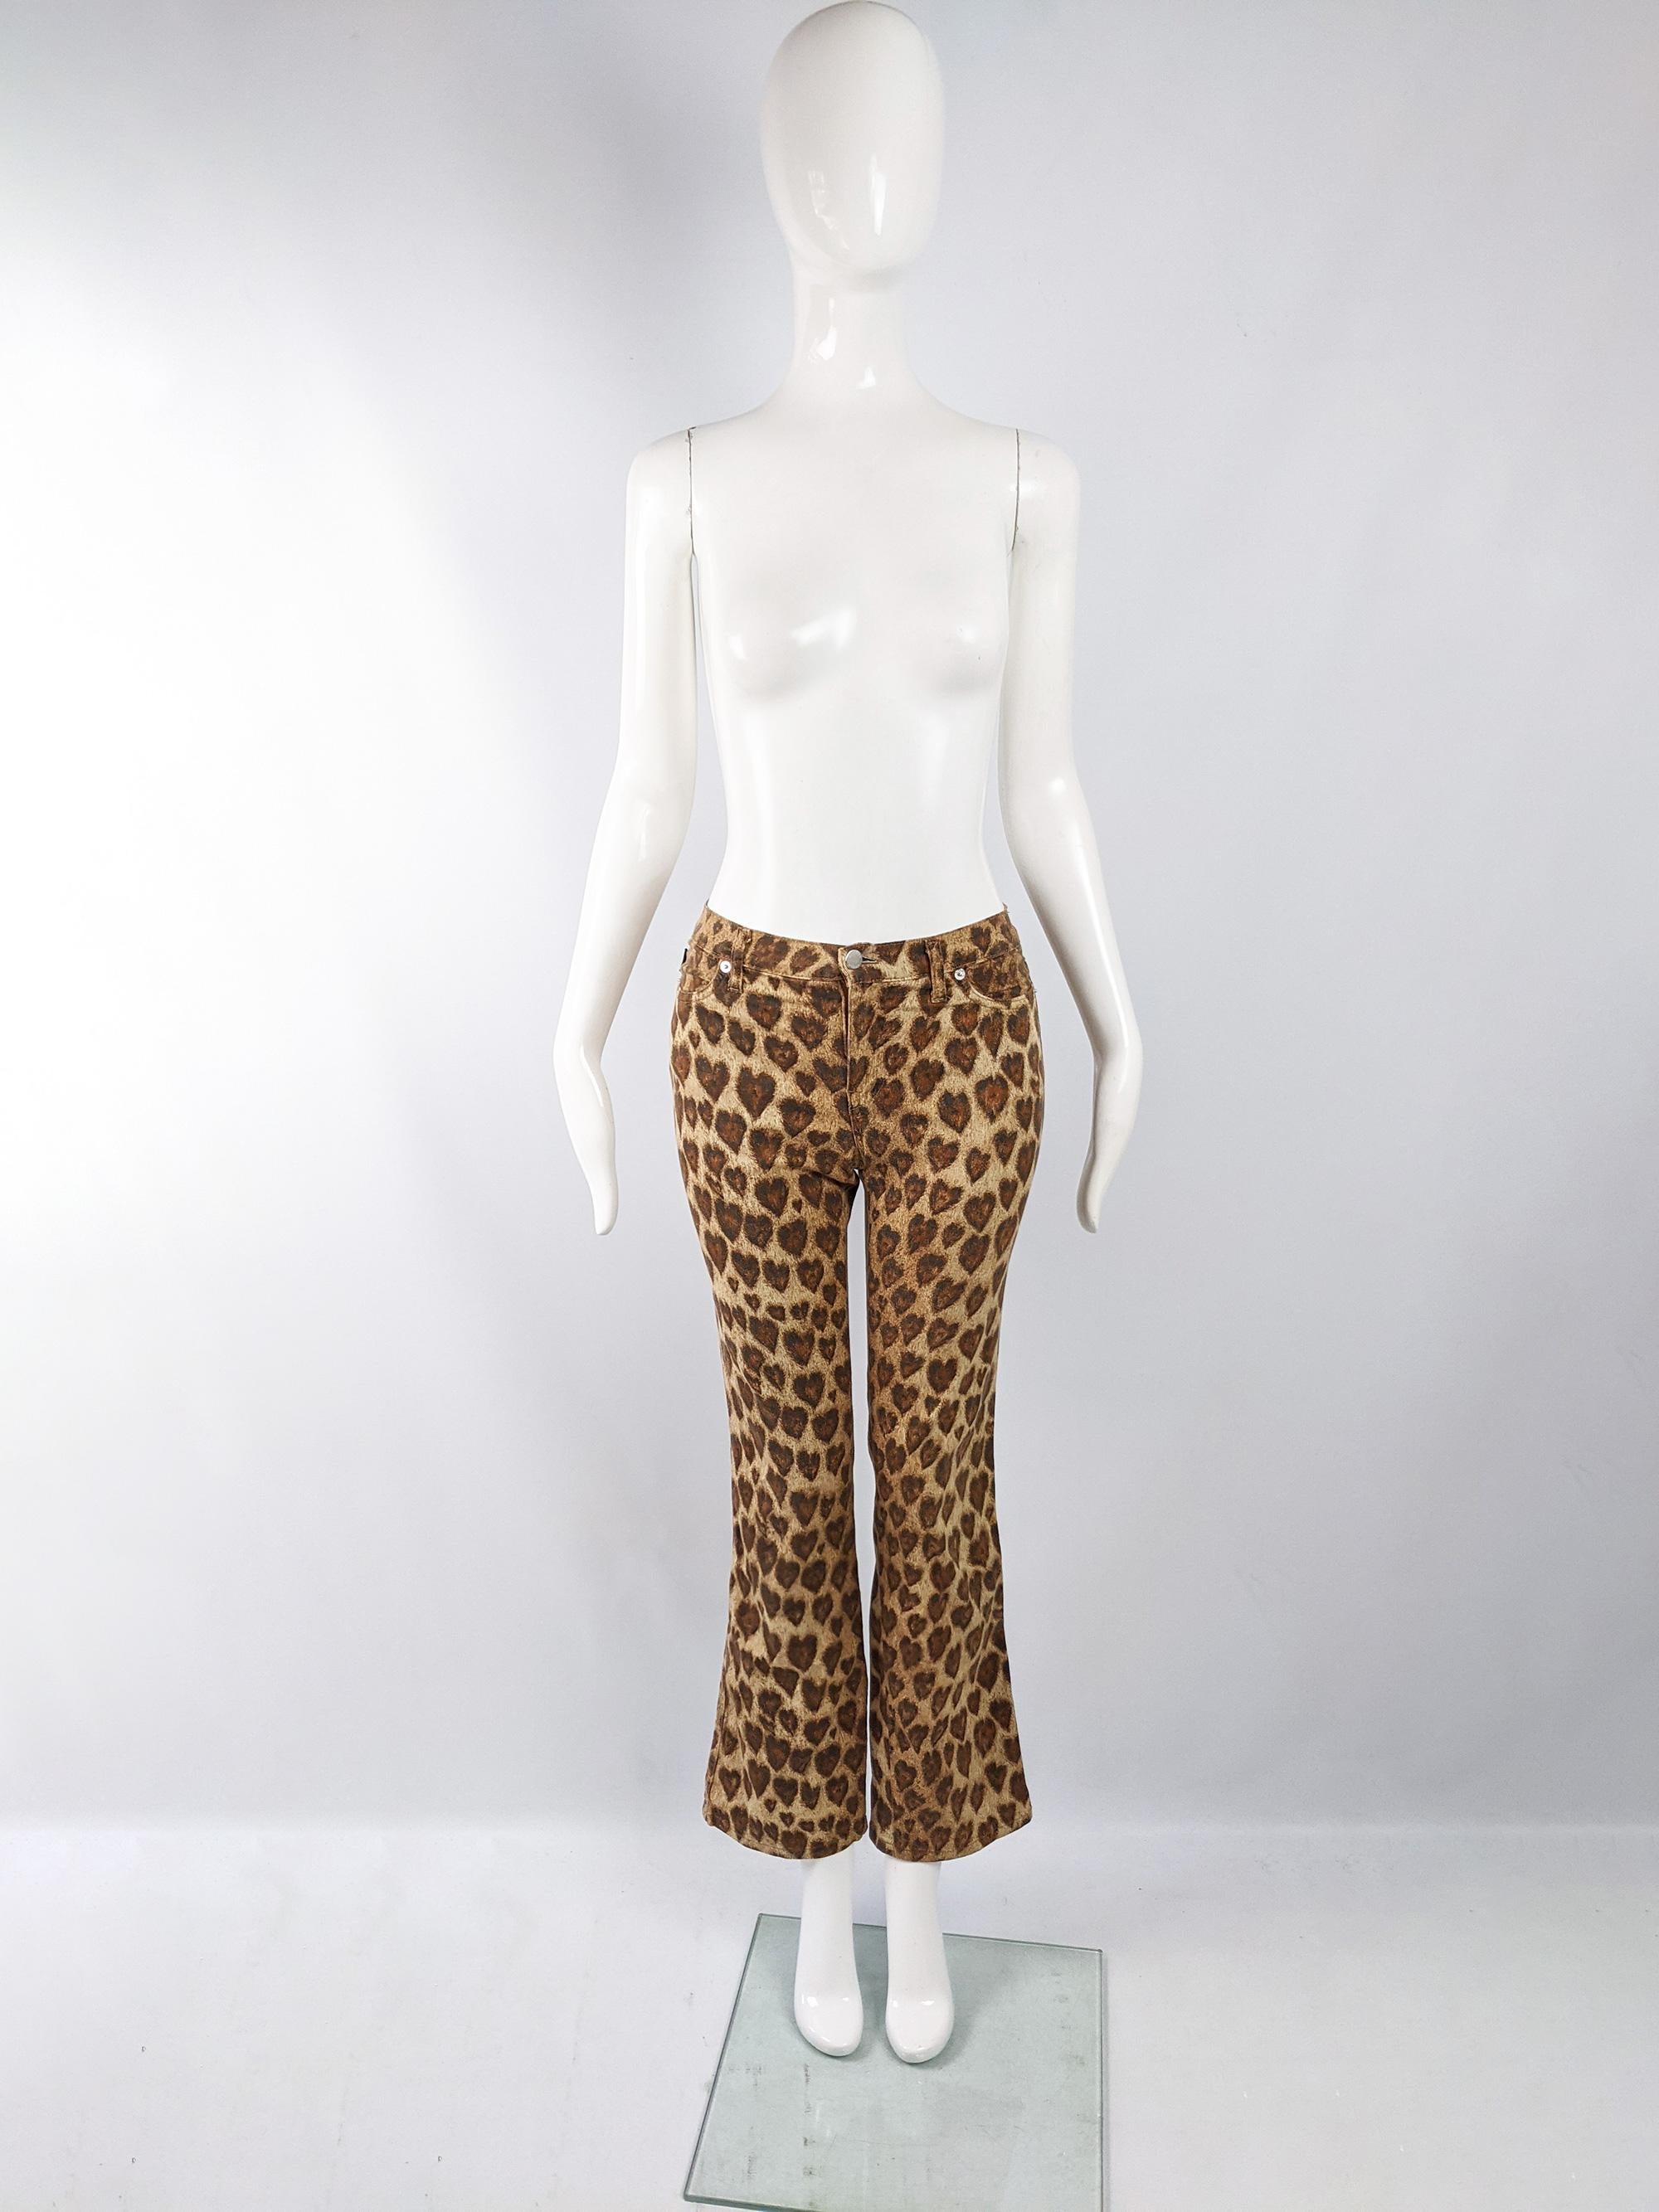 An amazing pair of vintage Moschino jeans from the 90s. In a cotton elastane blend with a digital love heart print throughout in the style of an animal print. 

Size: Marked 26